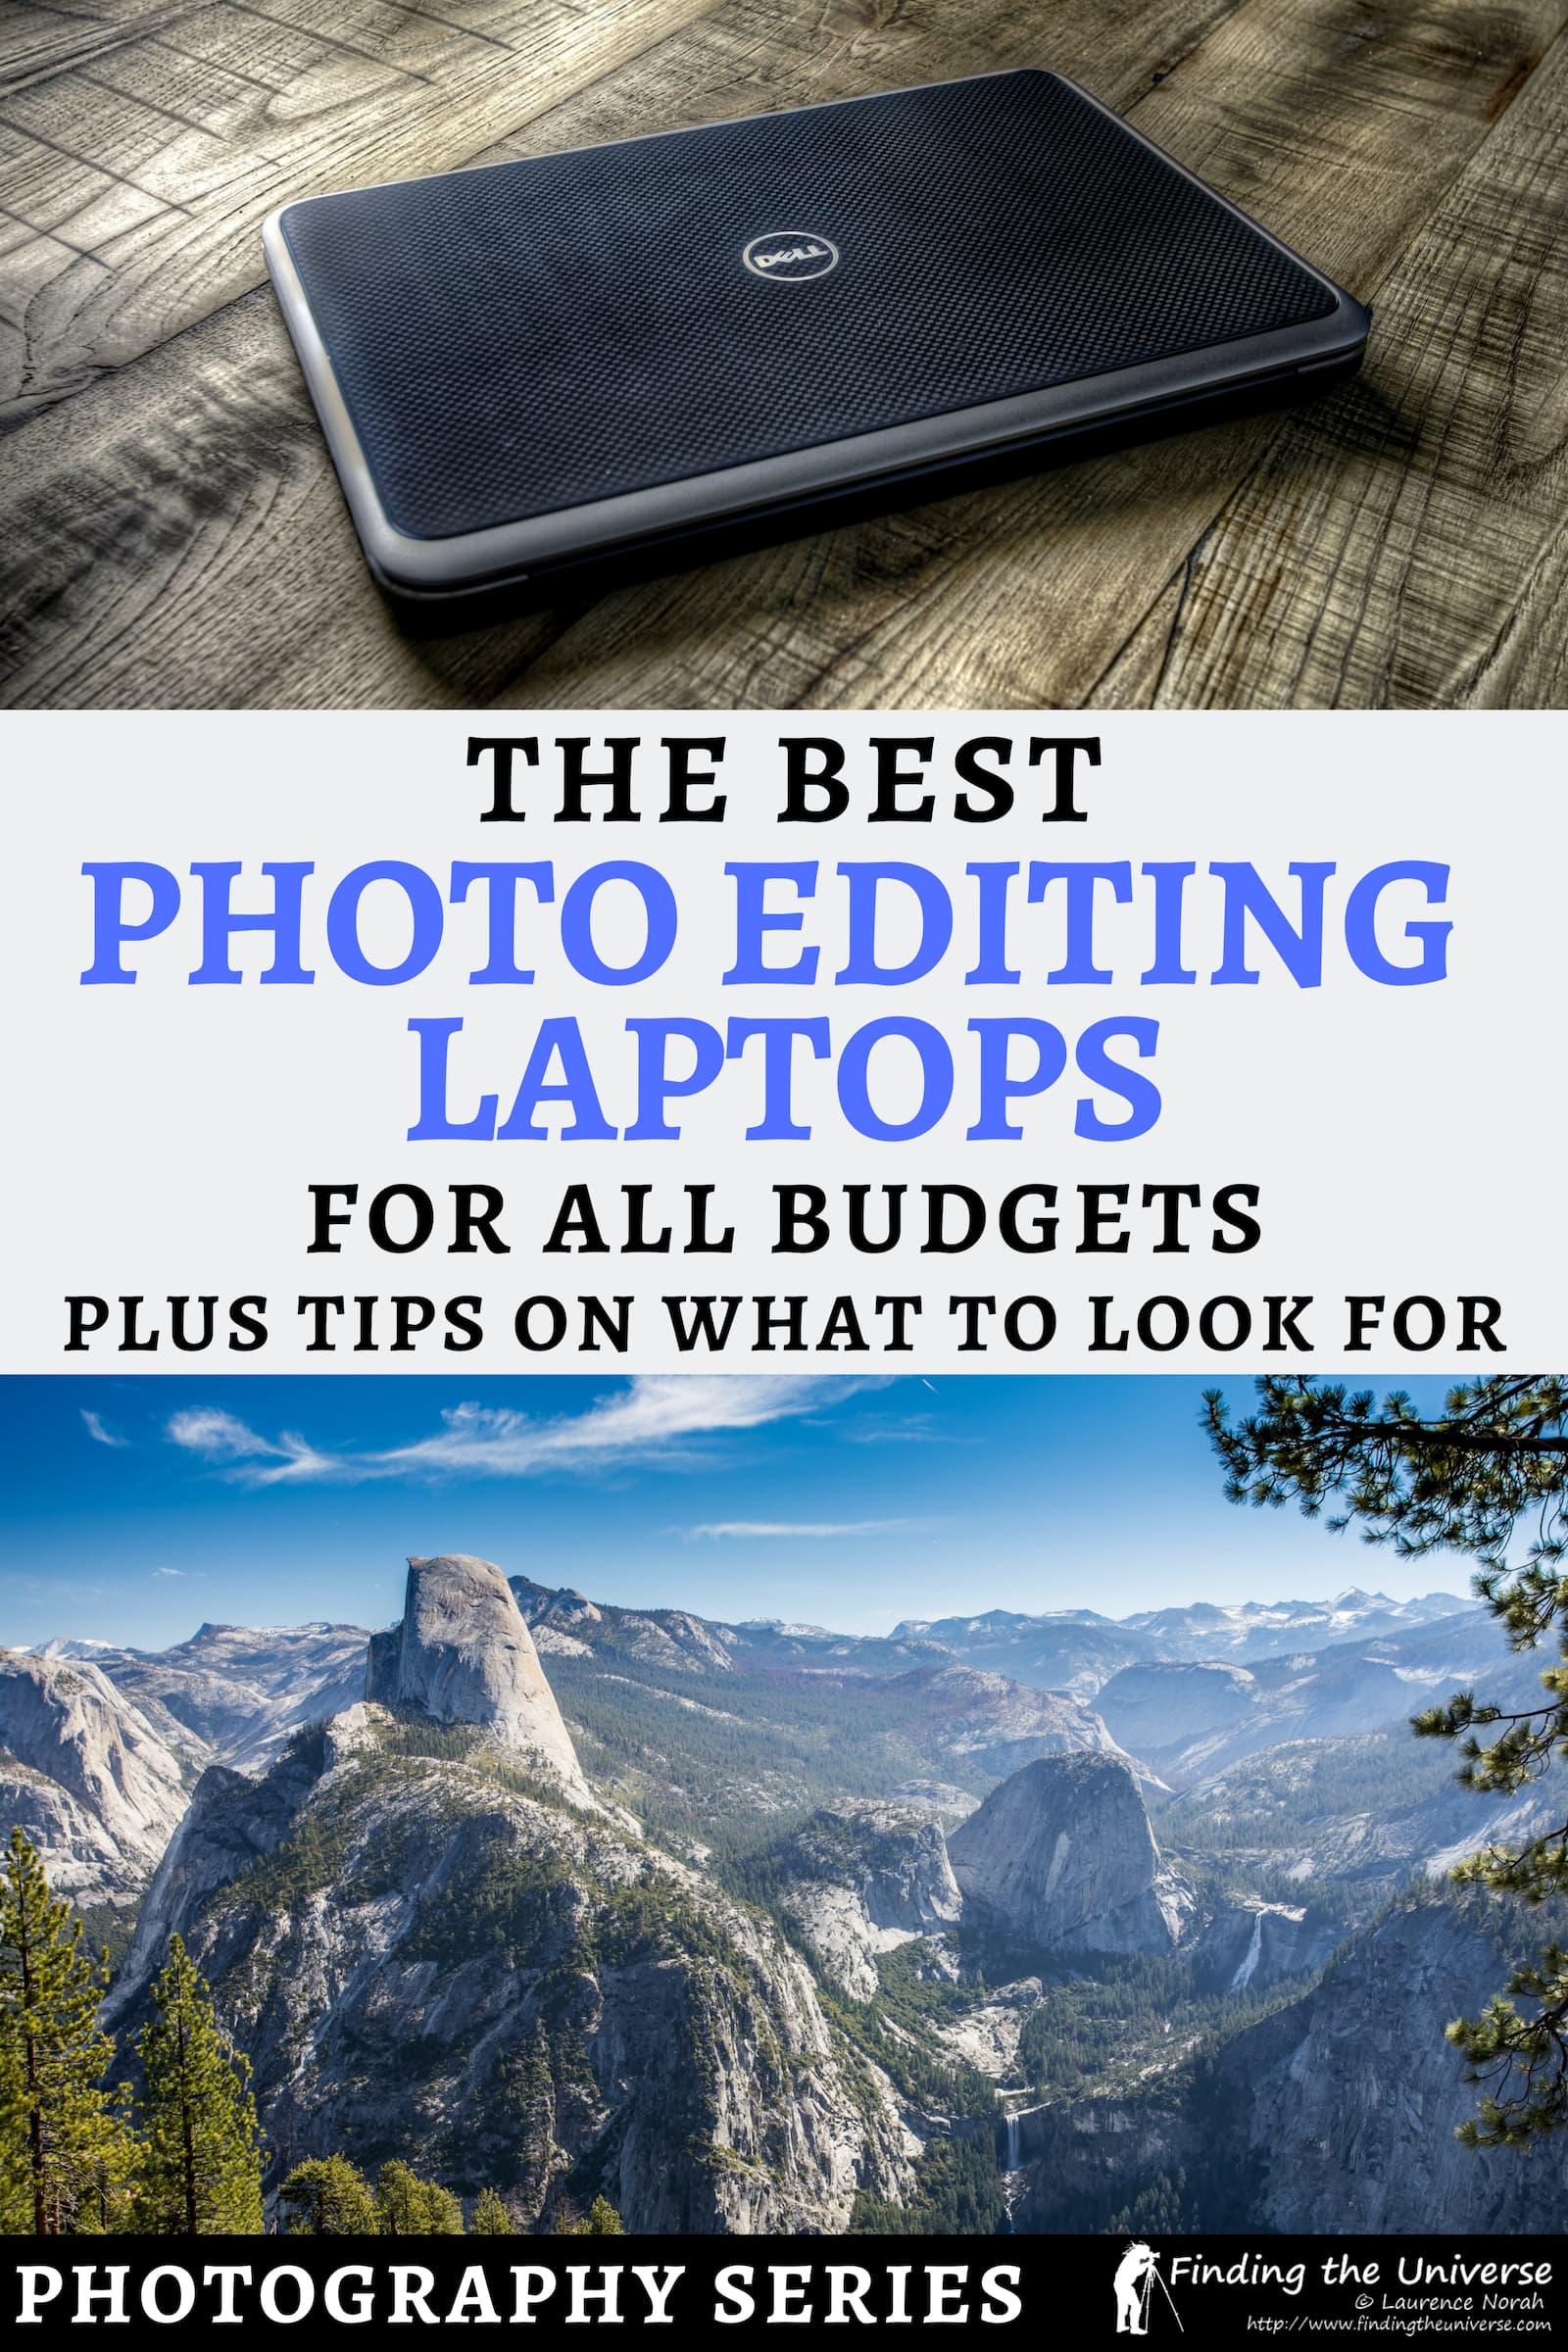 A detailed guide to the best laptop for photo editing, including laptops across a range of budgets and sizes to suit everyone